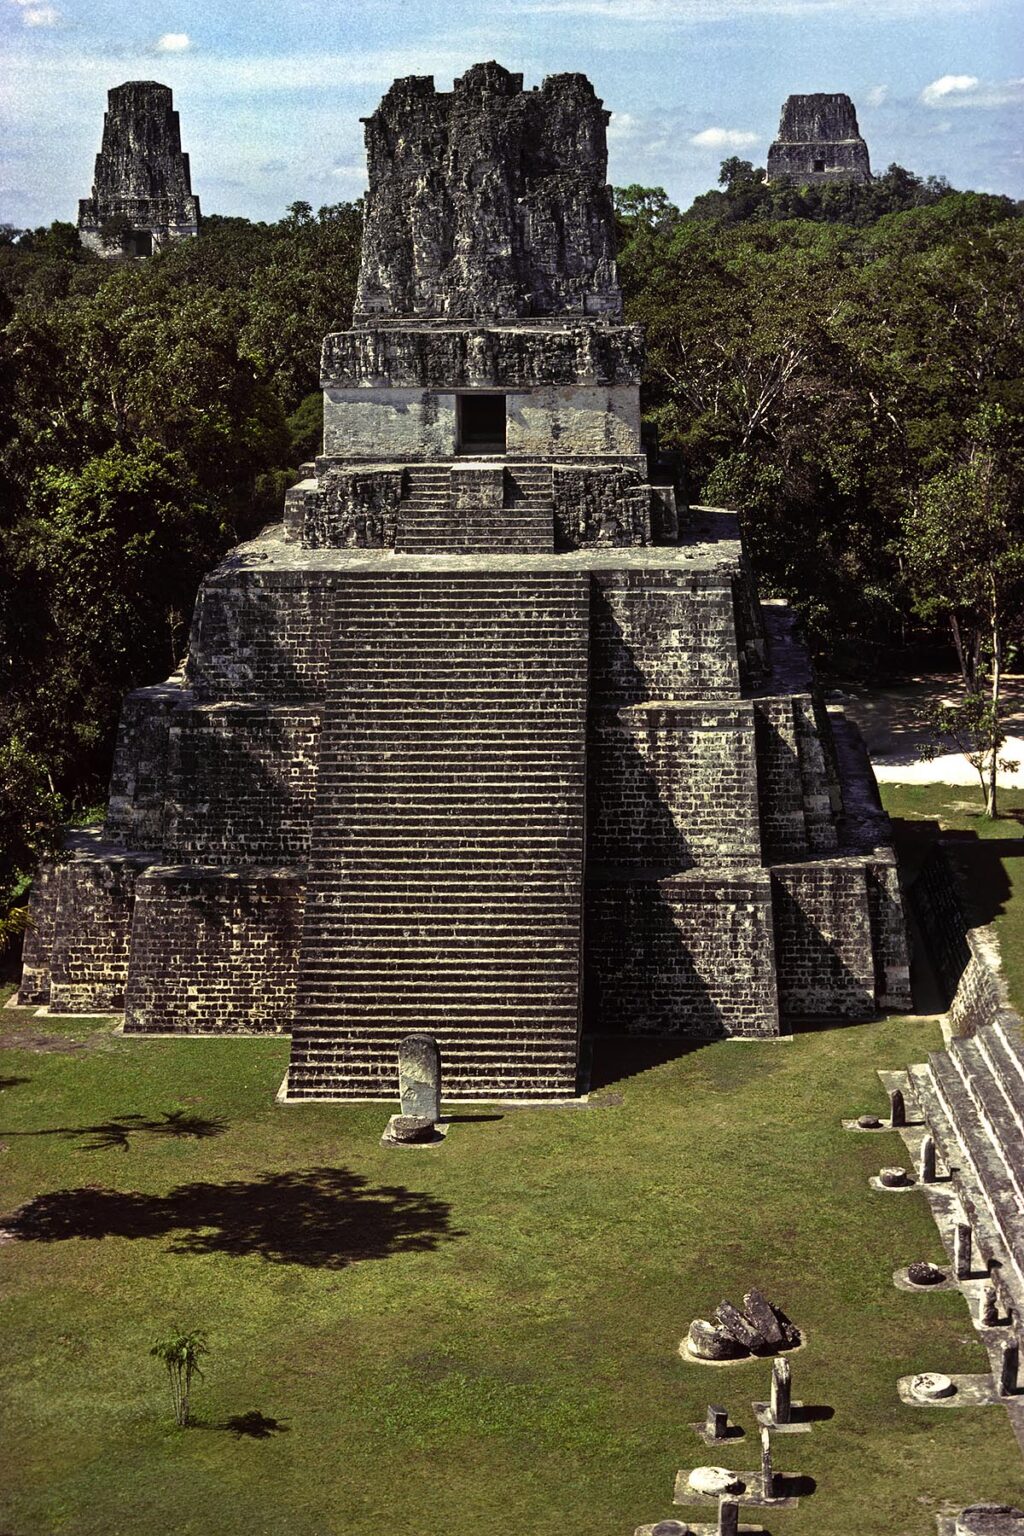 MAYA TEMPLE II, 125 ft. tall and dating to 700 AD, rising out of the PETEN JUNGLE - TIKAL, GUATEMALA